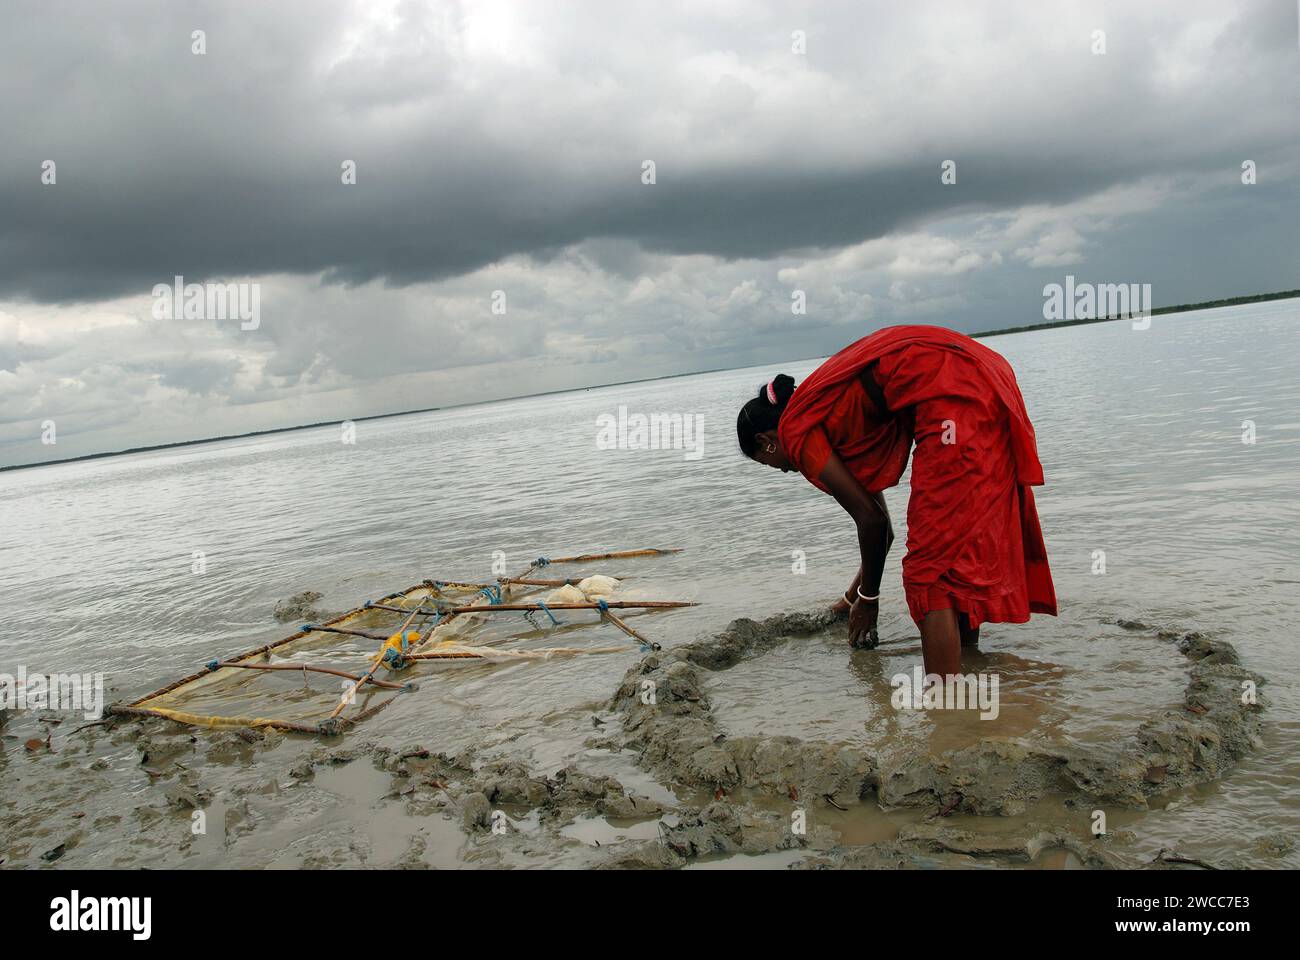 Women collecting prawn seeds from the saline river of Sundarban delta. Poverty prevails among the villagers that about 60,000 families go into chest-high waters of the rivers of Sundarbans regularly in search of prawn seeds (Bagda), where they often fall prey to shark bites and catch skin diseases. Life in the Sundarbans, the largest delta in the world, is all about the struggle for survival, be it for food, shelter or for sheer escape from man-eaters. Gosaba, Sundarban, West Bengal, India. Stock Photo